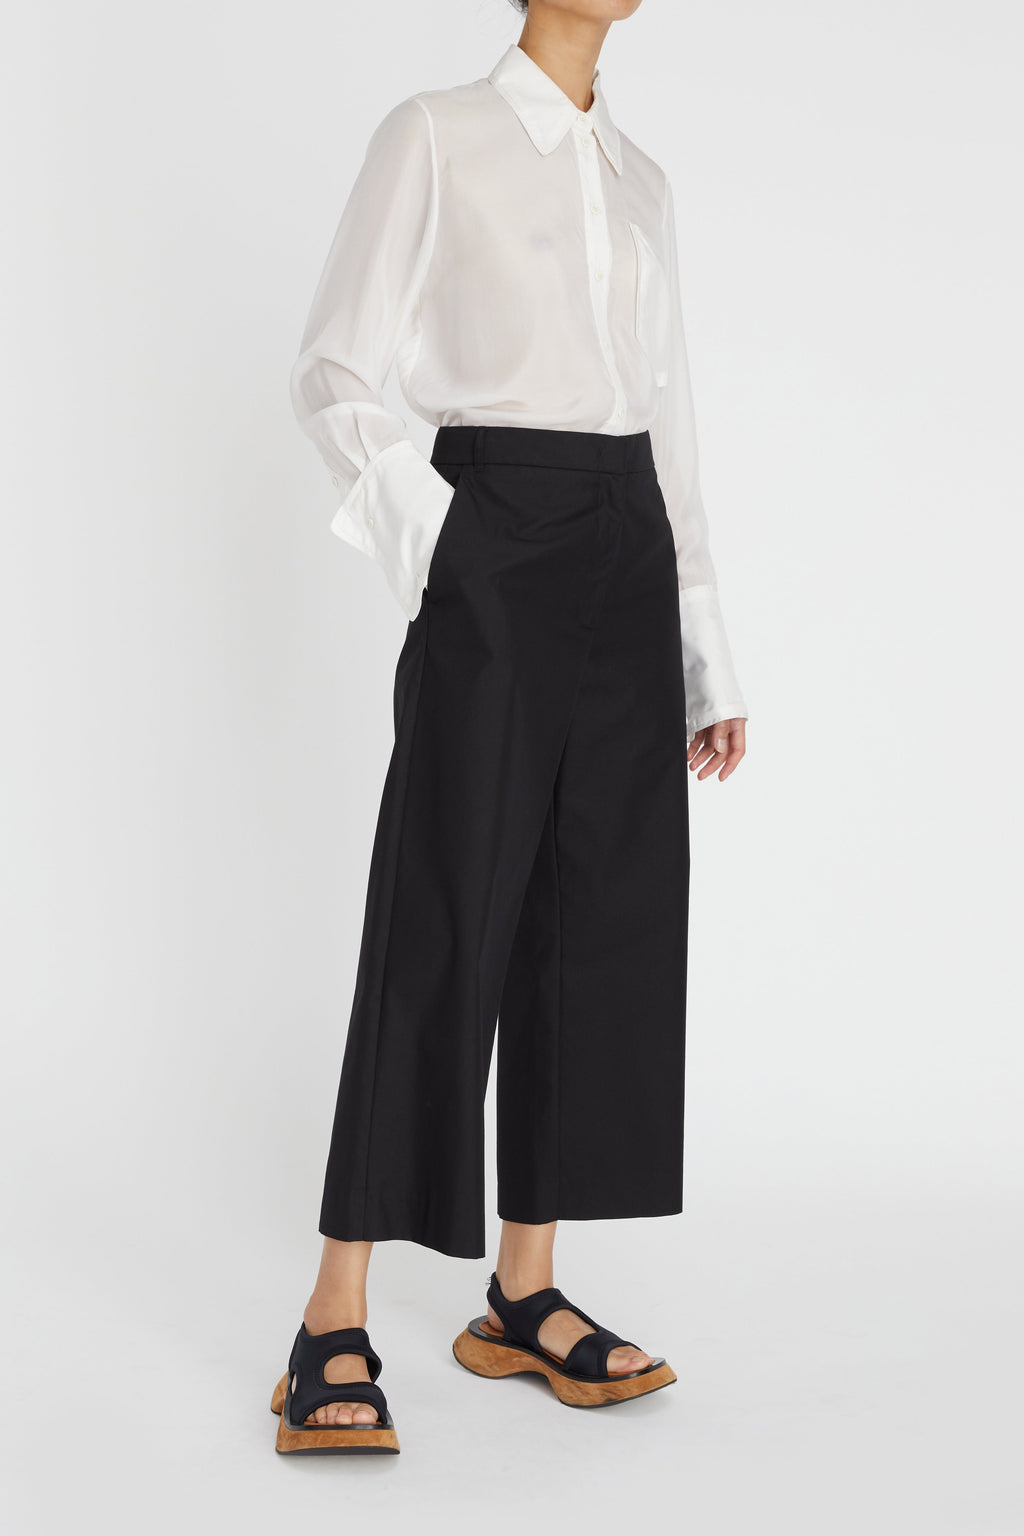 Lee 112329106 Ultra Lux Seamed Crop Pants in Mallory